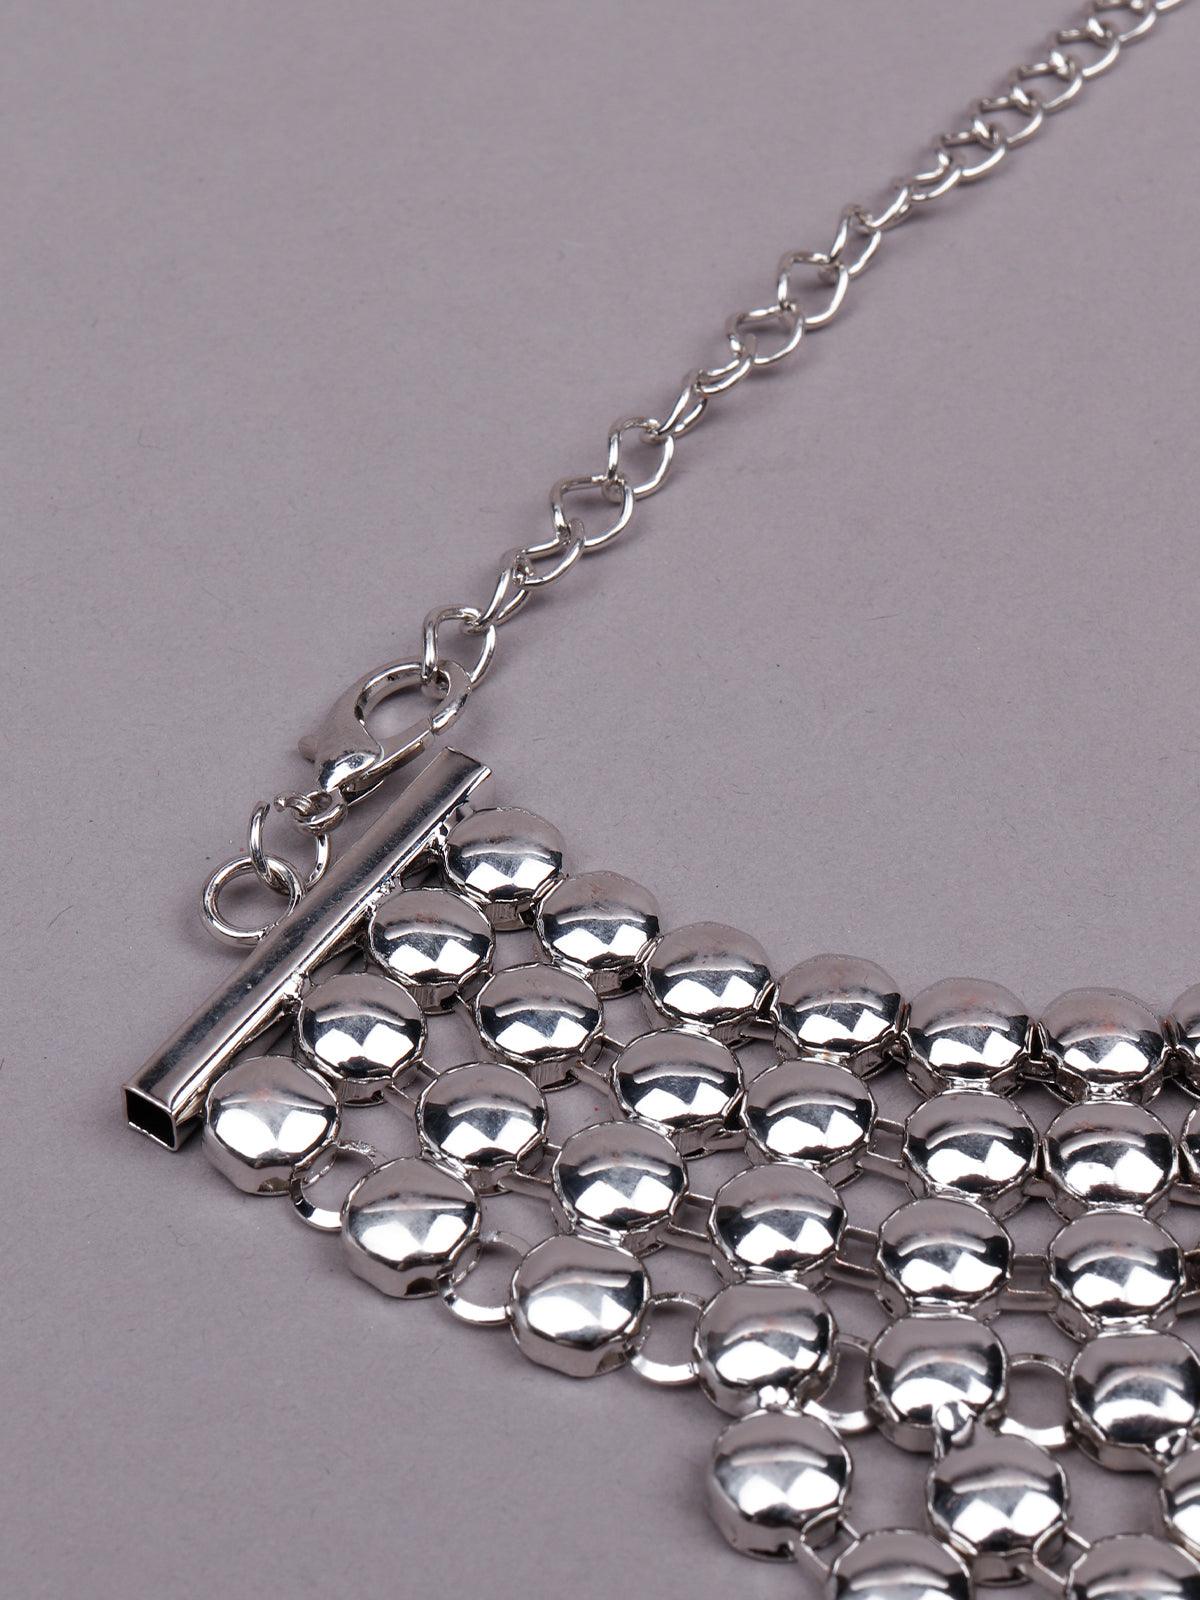 Women's Stunning Glossy Silver Body Chain Necklace - Odette